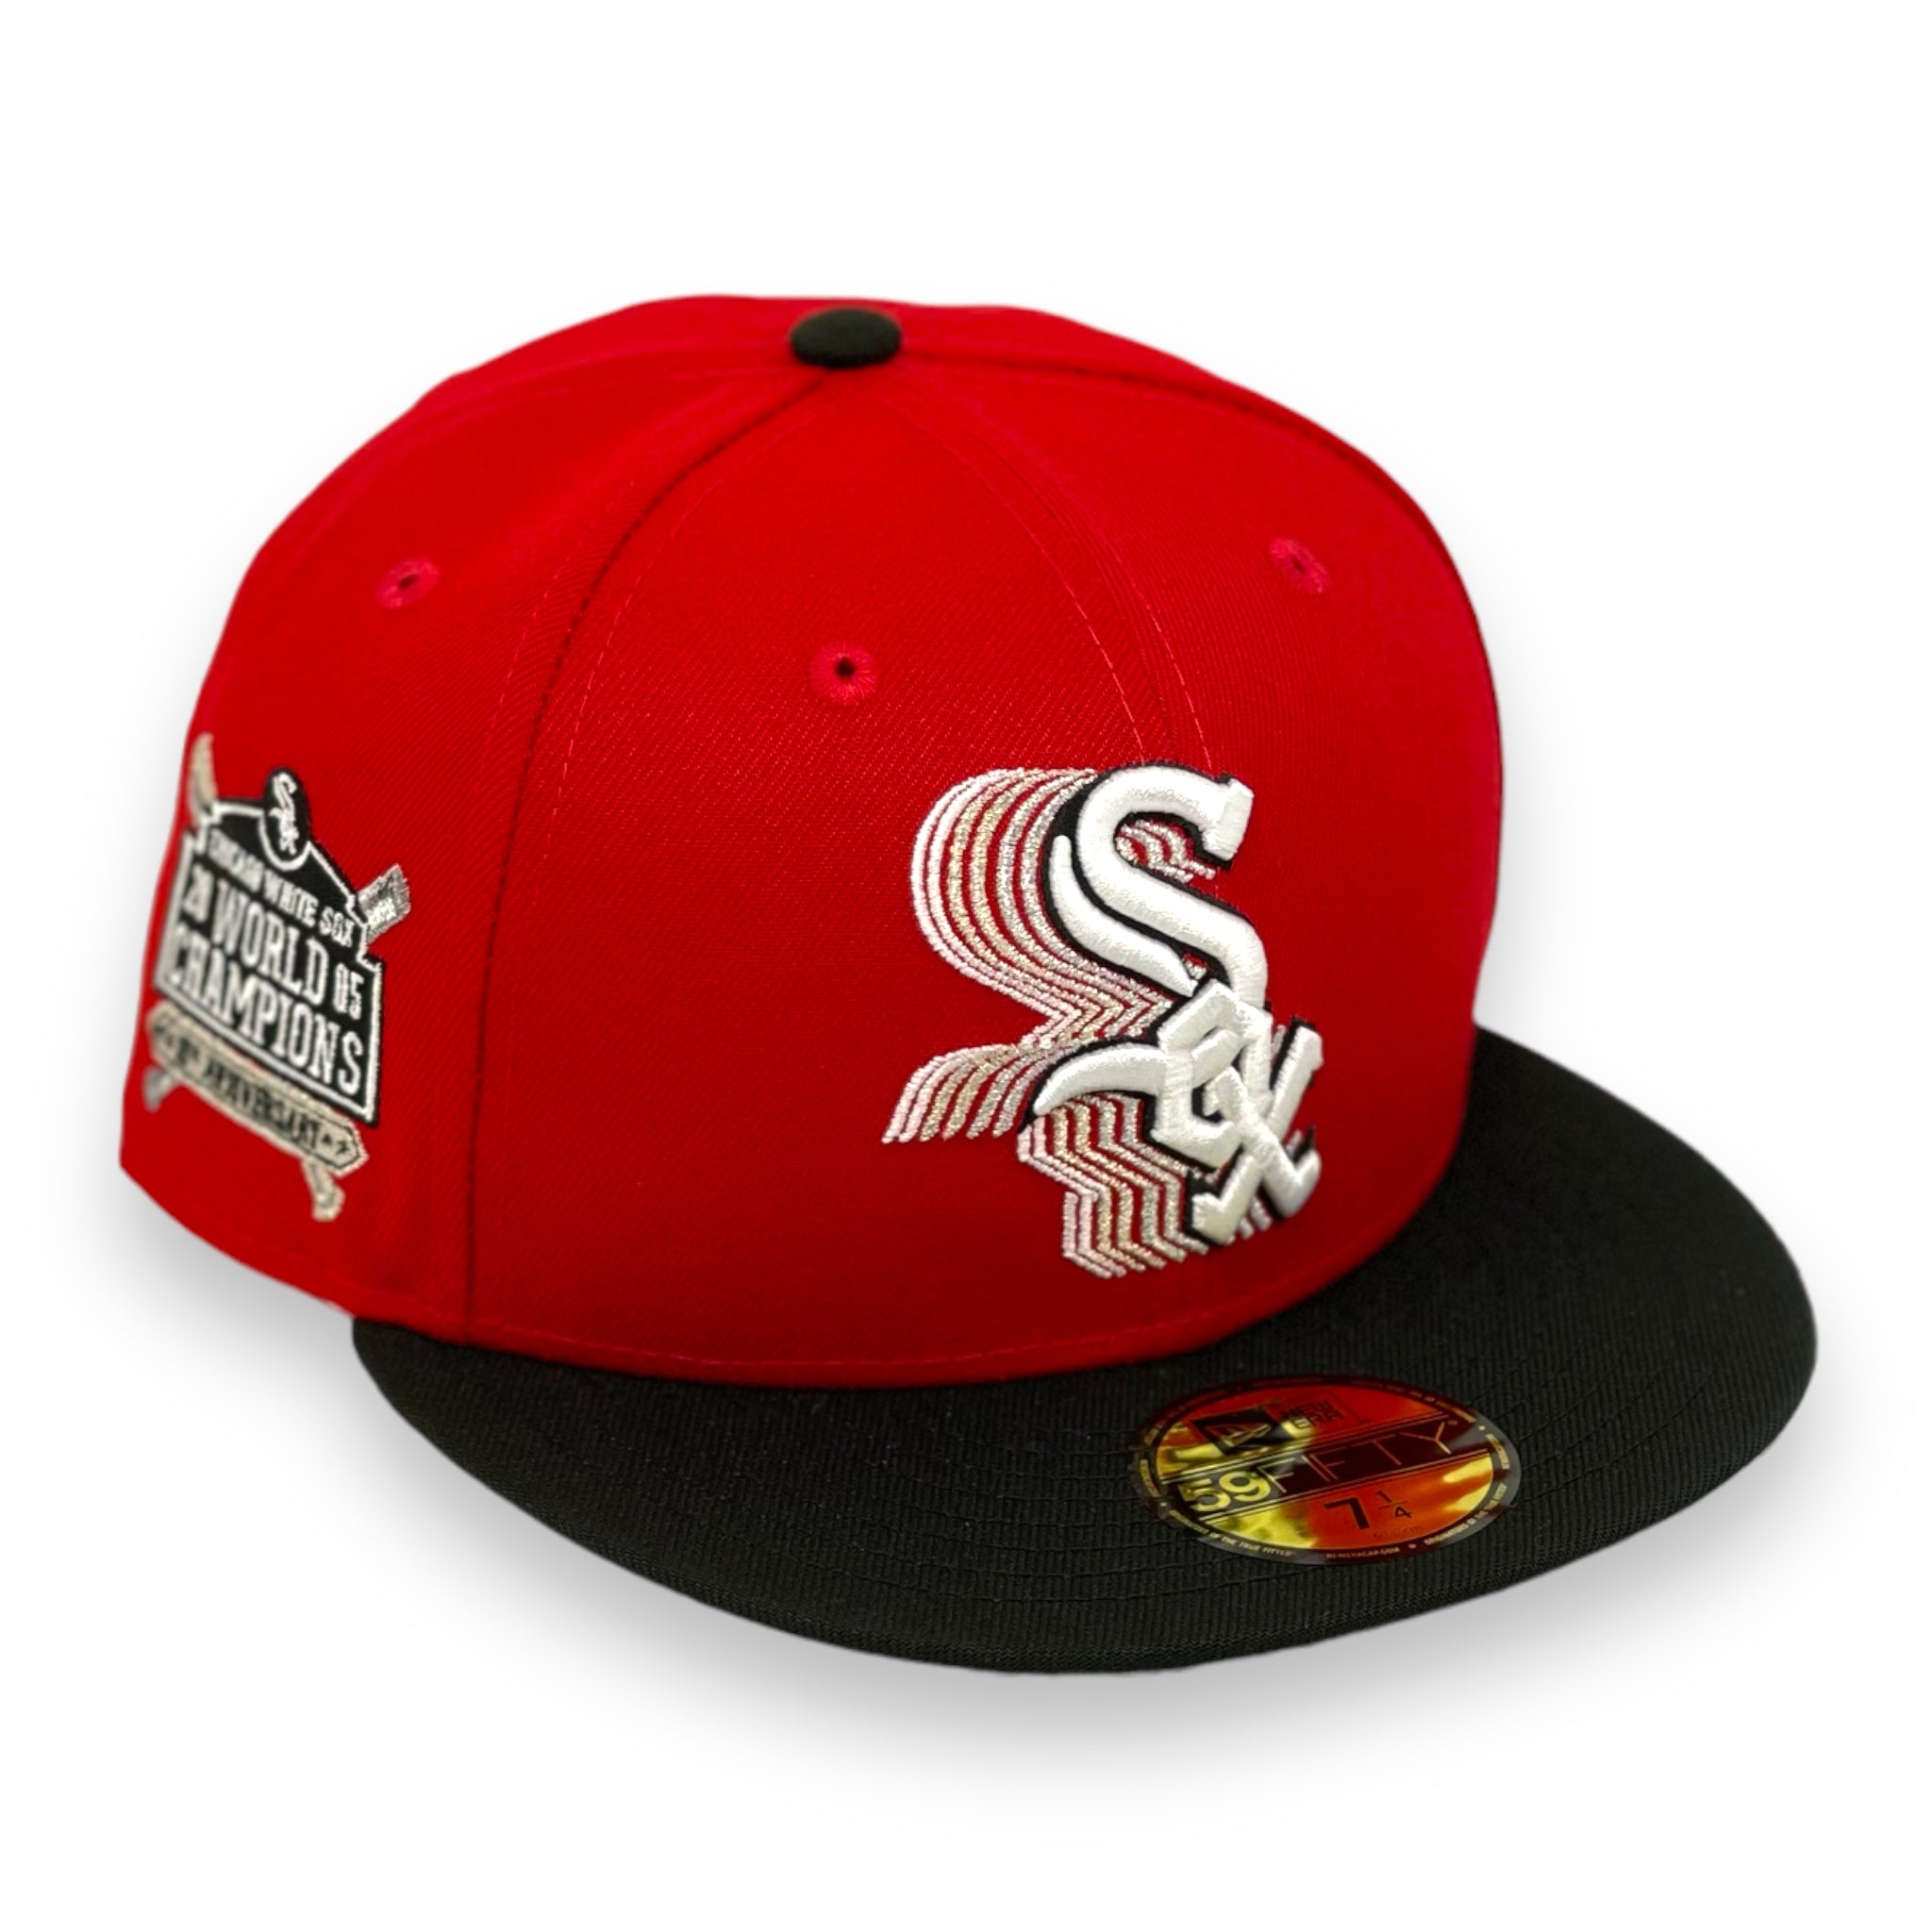 CHICAGO WHITESOX (RED) (10TH ANN) (2005 WS) NEW ERA 59FIFTY FITTED